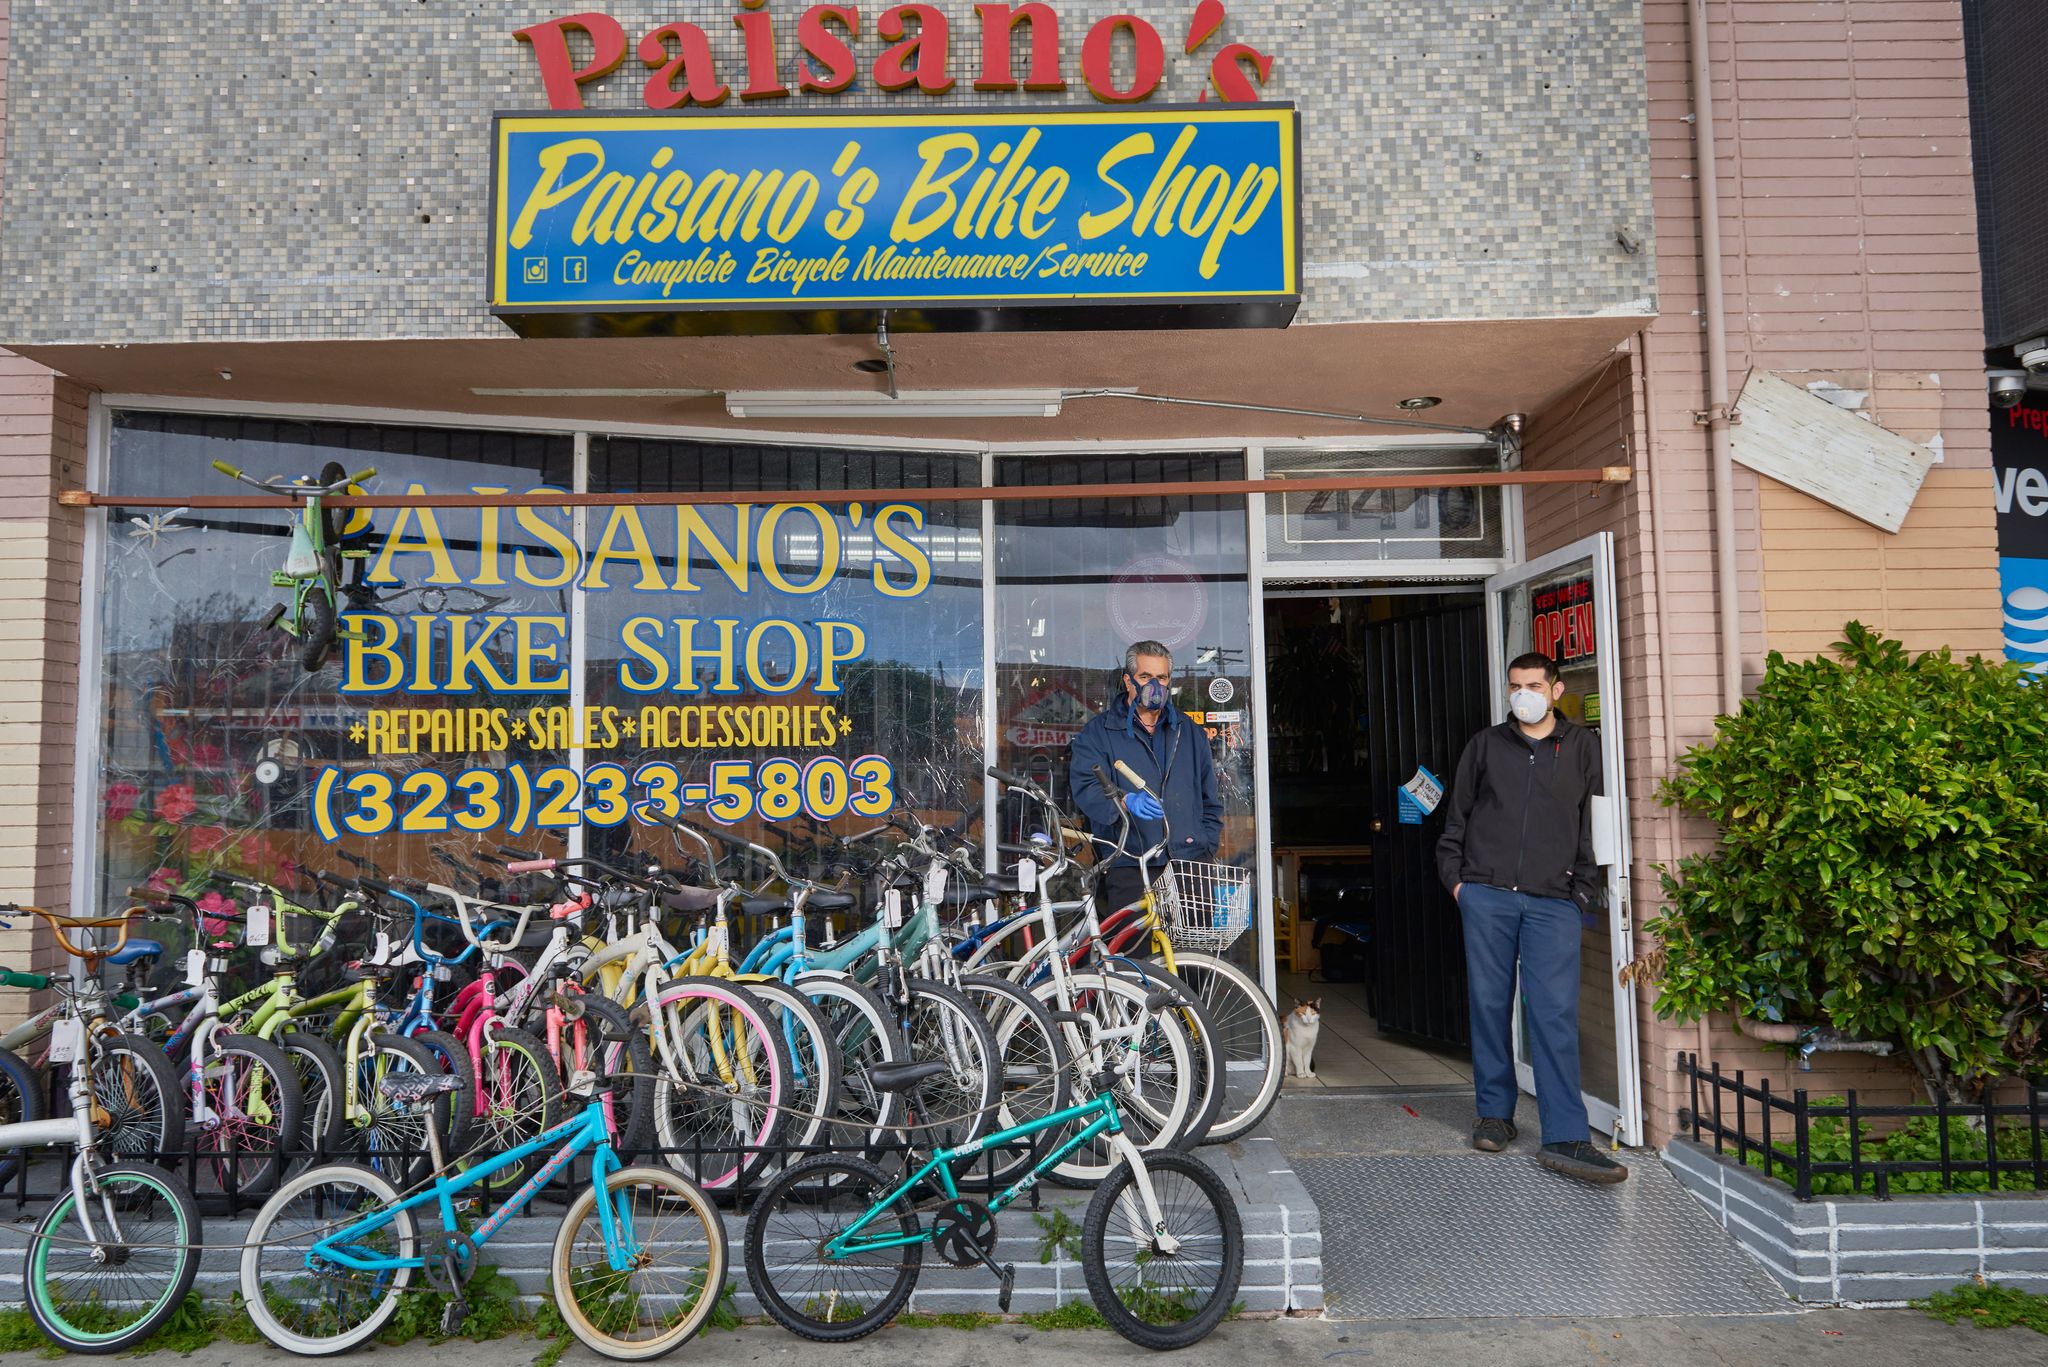 Paisano's bike shop in Los Angeles, California photographed in April 2020.